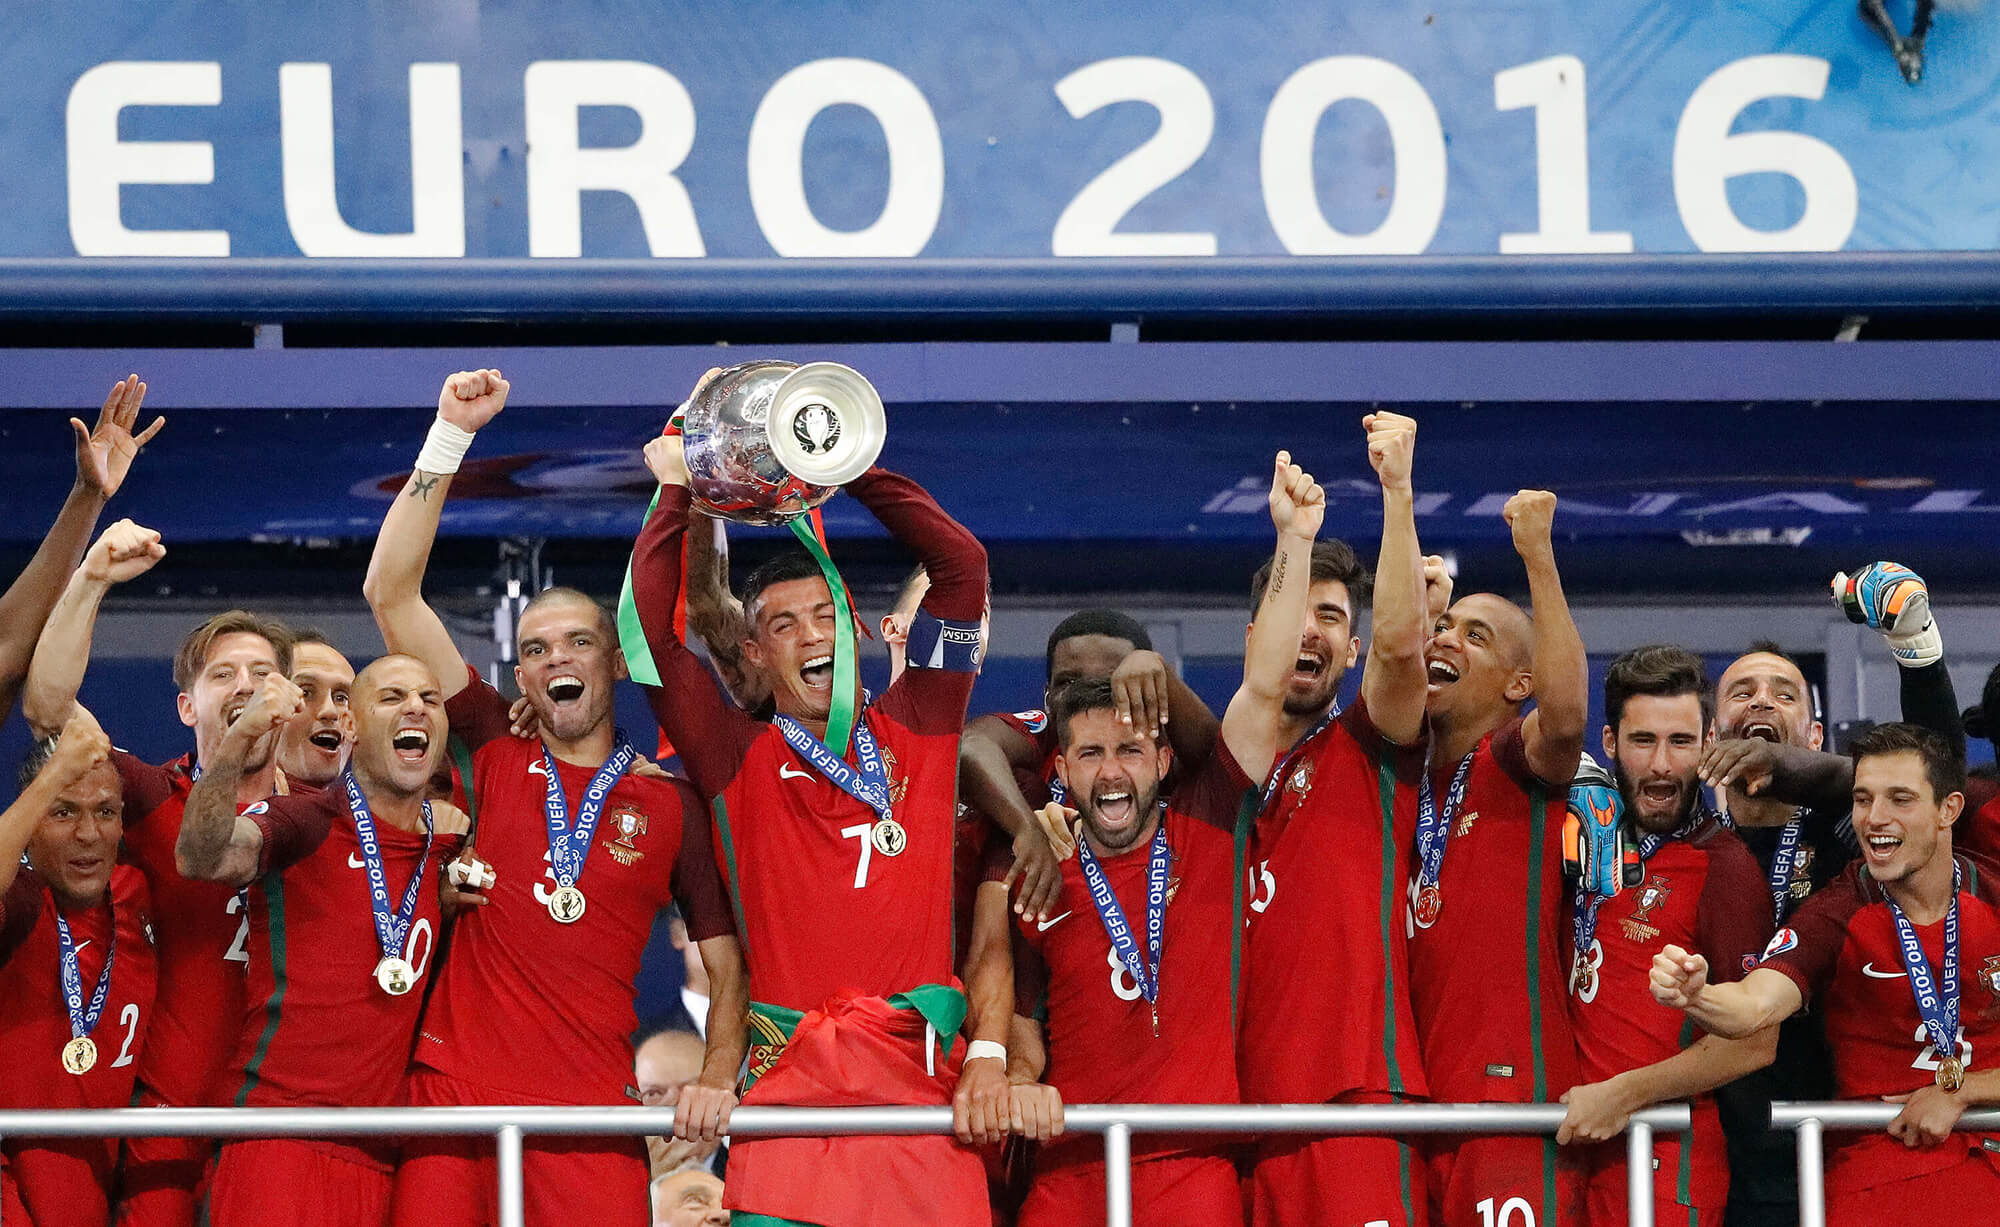 Image of the Portugal soccer team with trophy